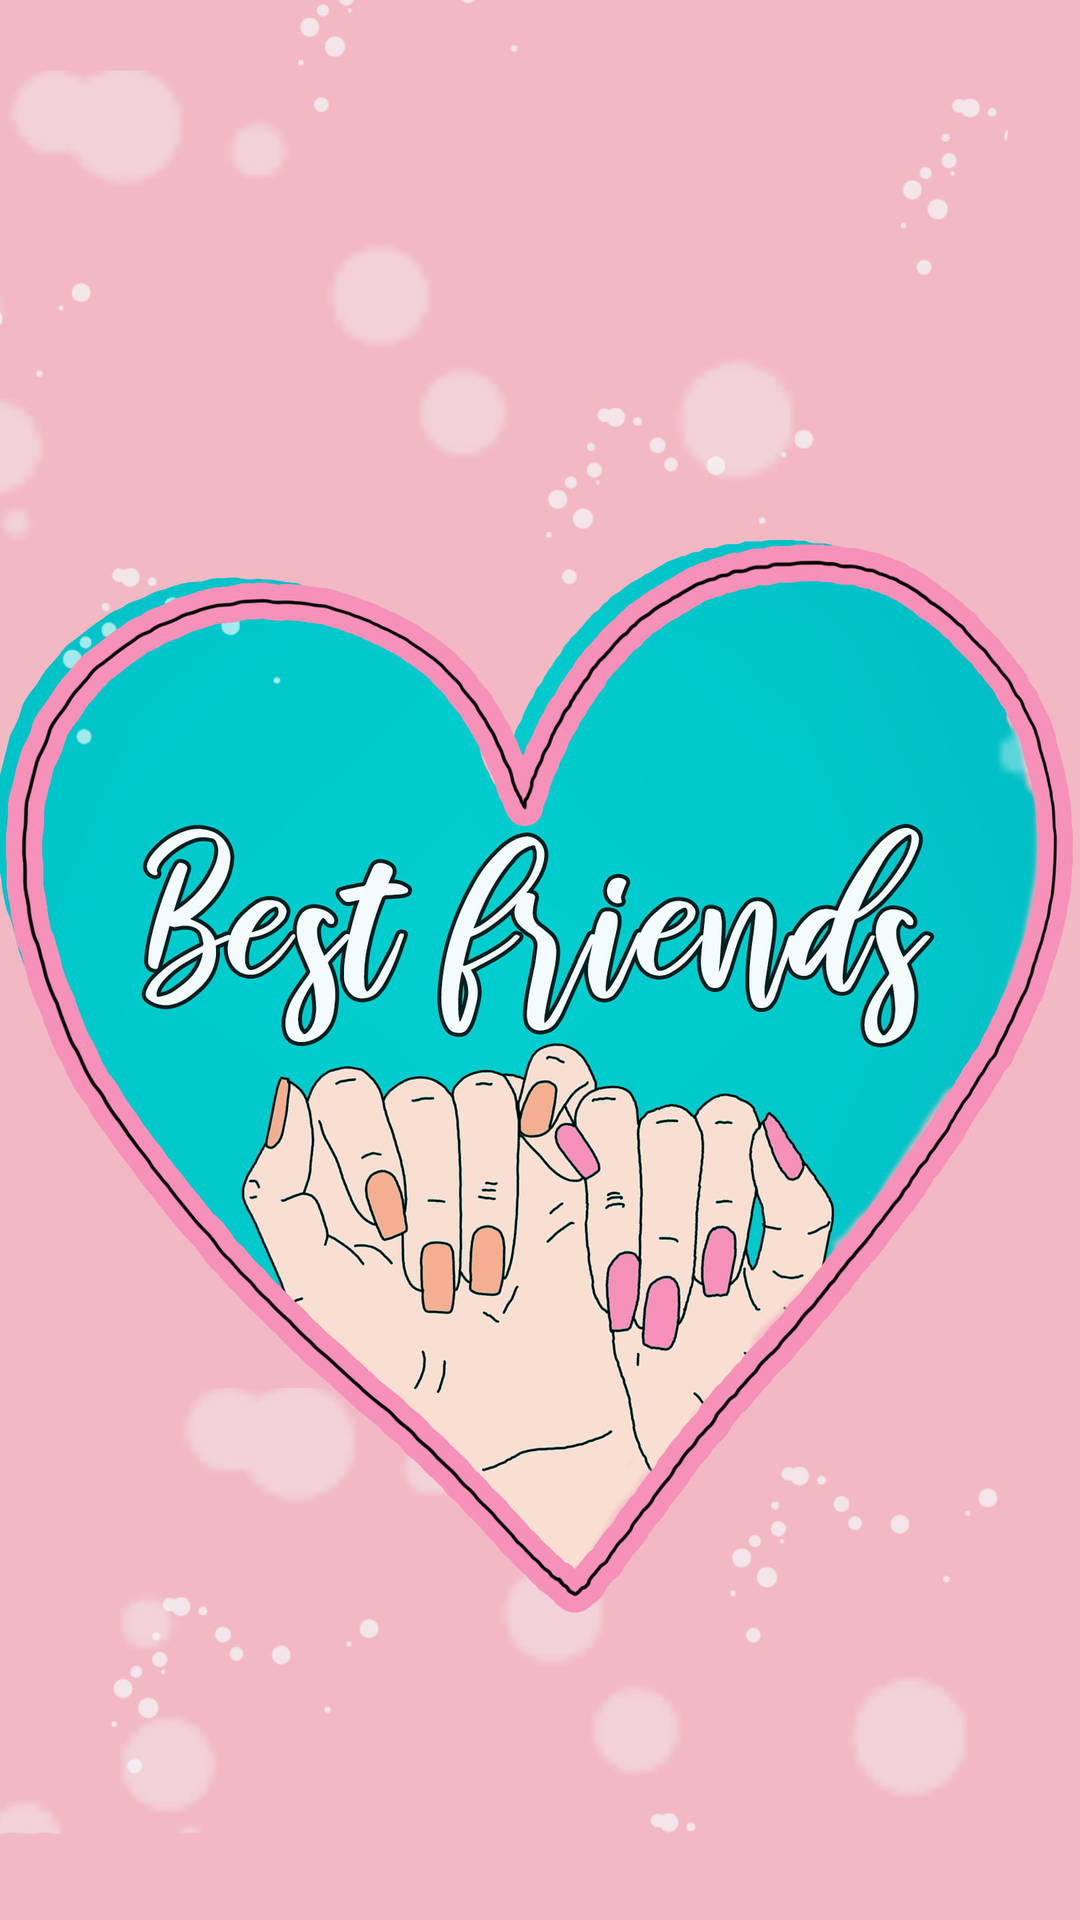 Free Girly Bff Wallpaper Downloads, Girly Bff Wallpaper for FREE